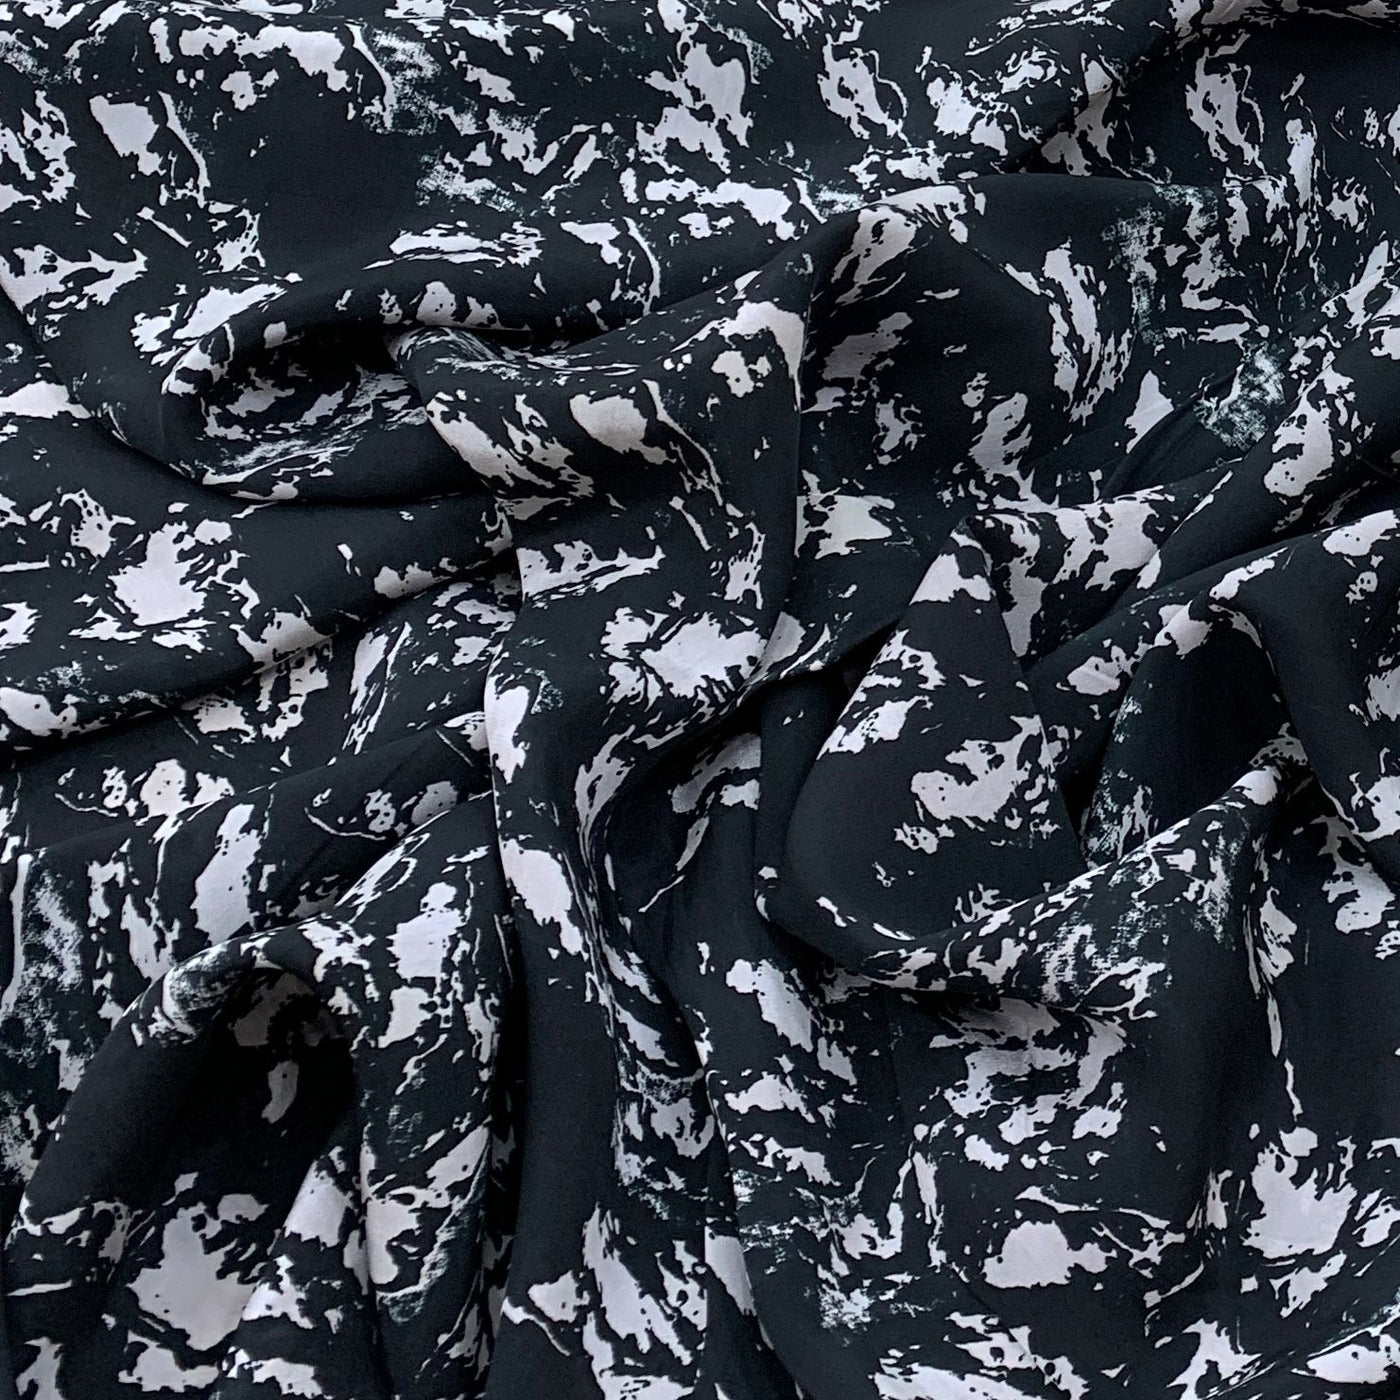 Black With White Design Crepe Printed Fabric